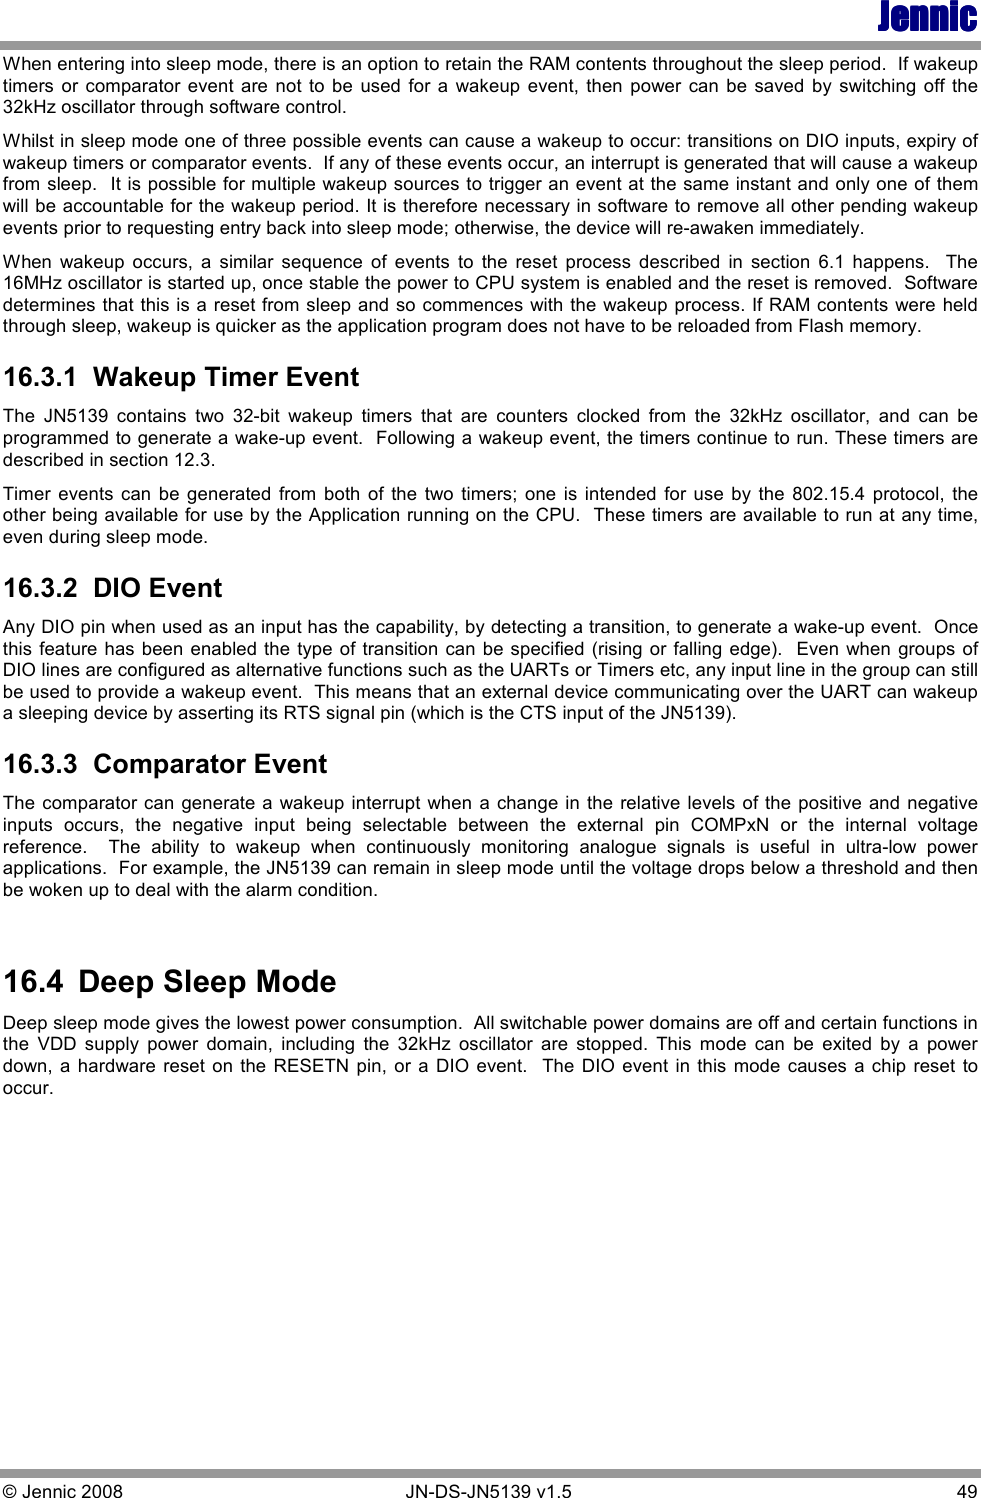 JennicJennicJennicJennic © Jennic 2008        JN-DS-JN5139 v1.5  49  When entering into sleep mode, there is an option to retain the RAM contents throughout the sleep period.  If wakeup timers  or comparator  event  are  not  to be  used  for  a  wakeup  event,  then  power  can  be saved  by  switching  off  the 32kHz oscillator through software control.   Whilst in sleep mode one of three possible events can cause a wakeup to occur: transitions on DIO inputs, expiry of wakeup timers or comparator events.  If any of these events occur, an interrupt is generated that will cause a wakeup from sleep.  It is possible for multiple wakeup sources to trigger an event at the same instant and only one of them will be accountable for the wakeup period. It is therefore necessary in software to remove all other pending wakeup events prior to requesting entry back into sleep mode; otherwise, the device will re-awaken immediately.  When  wakeup  occurs,  a  similar  sequence  of  events  to  the  reset  process  described  in  section  6.1  happens.    The 16MHz oscillator is started up, once stable the power to CPU system is enabled and the reset is removed.  Software determines that this is a reset from sleep and so commences with the wakeup process. If RAM contents were held through sleep, wakeup is quicker as the application program does not have to be reloaded from Flash memory. 16.3.1  Wakeup Timer Event The  JN5139  contains  two  32-bit  wakeup  timers  that  are  counters  clocked  from  the  32kHz  oscillator,  and  can  be programmed to generate a wake-up event.  Following a wakeup event, the timers continue to run. These timers are described in section 12.3. Timer  events can  be  generated  from  both  of  the  two  timers;  one  is  intended  for use by  the  802.15.4  protocol,  the other being available for use by the Application running on the CPU.  These timers are available to run at any time, even during sleep mode. 16.3.2  DIO Event Any DIO pin when used as an input has the capability, by detecting a transition, to generate a wake-up event.  Once this feature has been enabled the type of  transition  can  be specified  (rising or falling edge).  Even when groups of DIO lines are configured as alternative functions such as the UARTs or Timers etc, any input line in the group can still be used to provide a wakeup event.  This means that an external device communicating over the UART can wakeup a sleeping device by asserting its RTS signal pin (which is the CTS input of the JN5139). 16.3.3  Comparator Event The comparator can  generate a wakeup interrupt when a change in the relative levels  of the positive and negative inputs  occurs,  the  negative  input  being  selectable  between  the  external  pin  COMPxN  or  the  internal  voltage reference.    The  ability  to  wakeup  when  continuously  monitoring  analogue  signals  is  useful  in  ultra-low  power applications.  For example, the JN5139 can remain in sleep mode until the voltage drops below a threshold and then be woken up to deal with the alarm condition.  16.4  Deep Sleep Mode Deep sleep mode gives the lowest power consumption.  All switchable power domains are off and certain functions in the  VDD  supply  power  domain,  including  the  32kHz  oscillator  are  stopped.  This  mode  can  be  exited  by  a  power down, a hardware  reset  on  the RESETN  pin,  or a DIO  event.   The  DIO event in this  mode causes a chip  reset  to occur.   